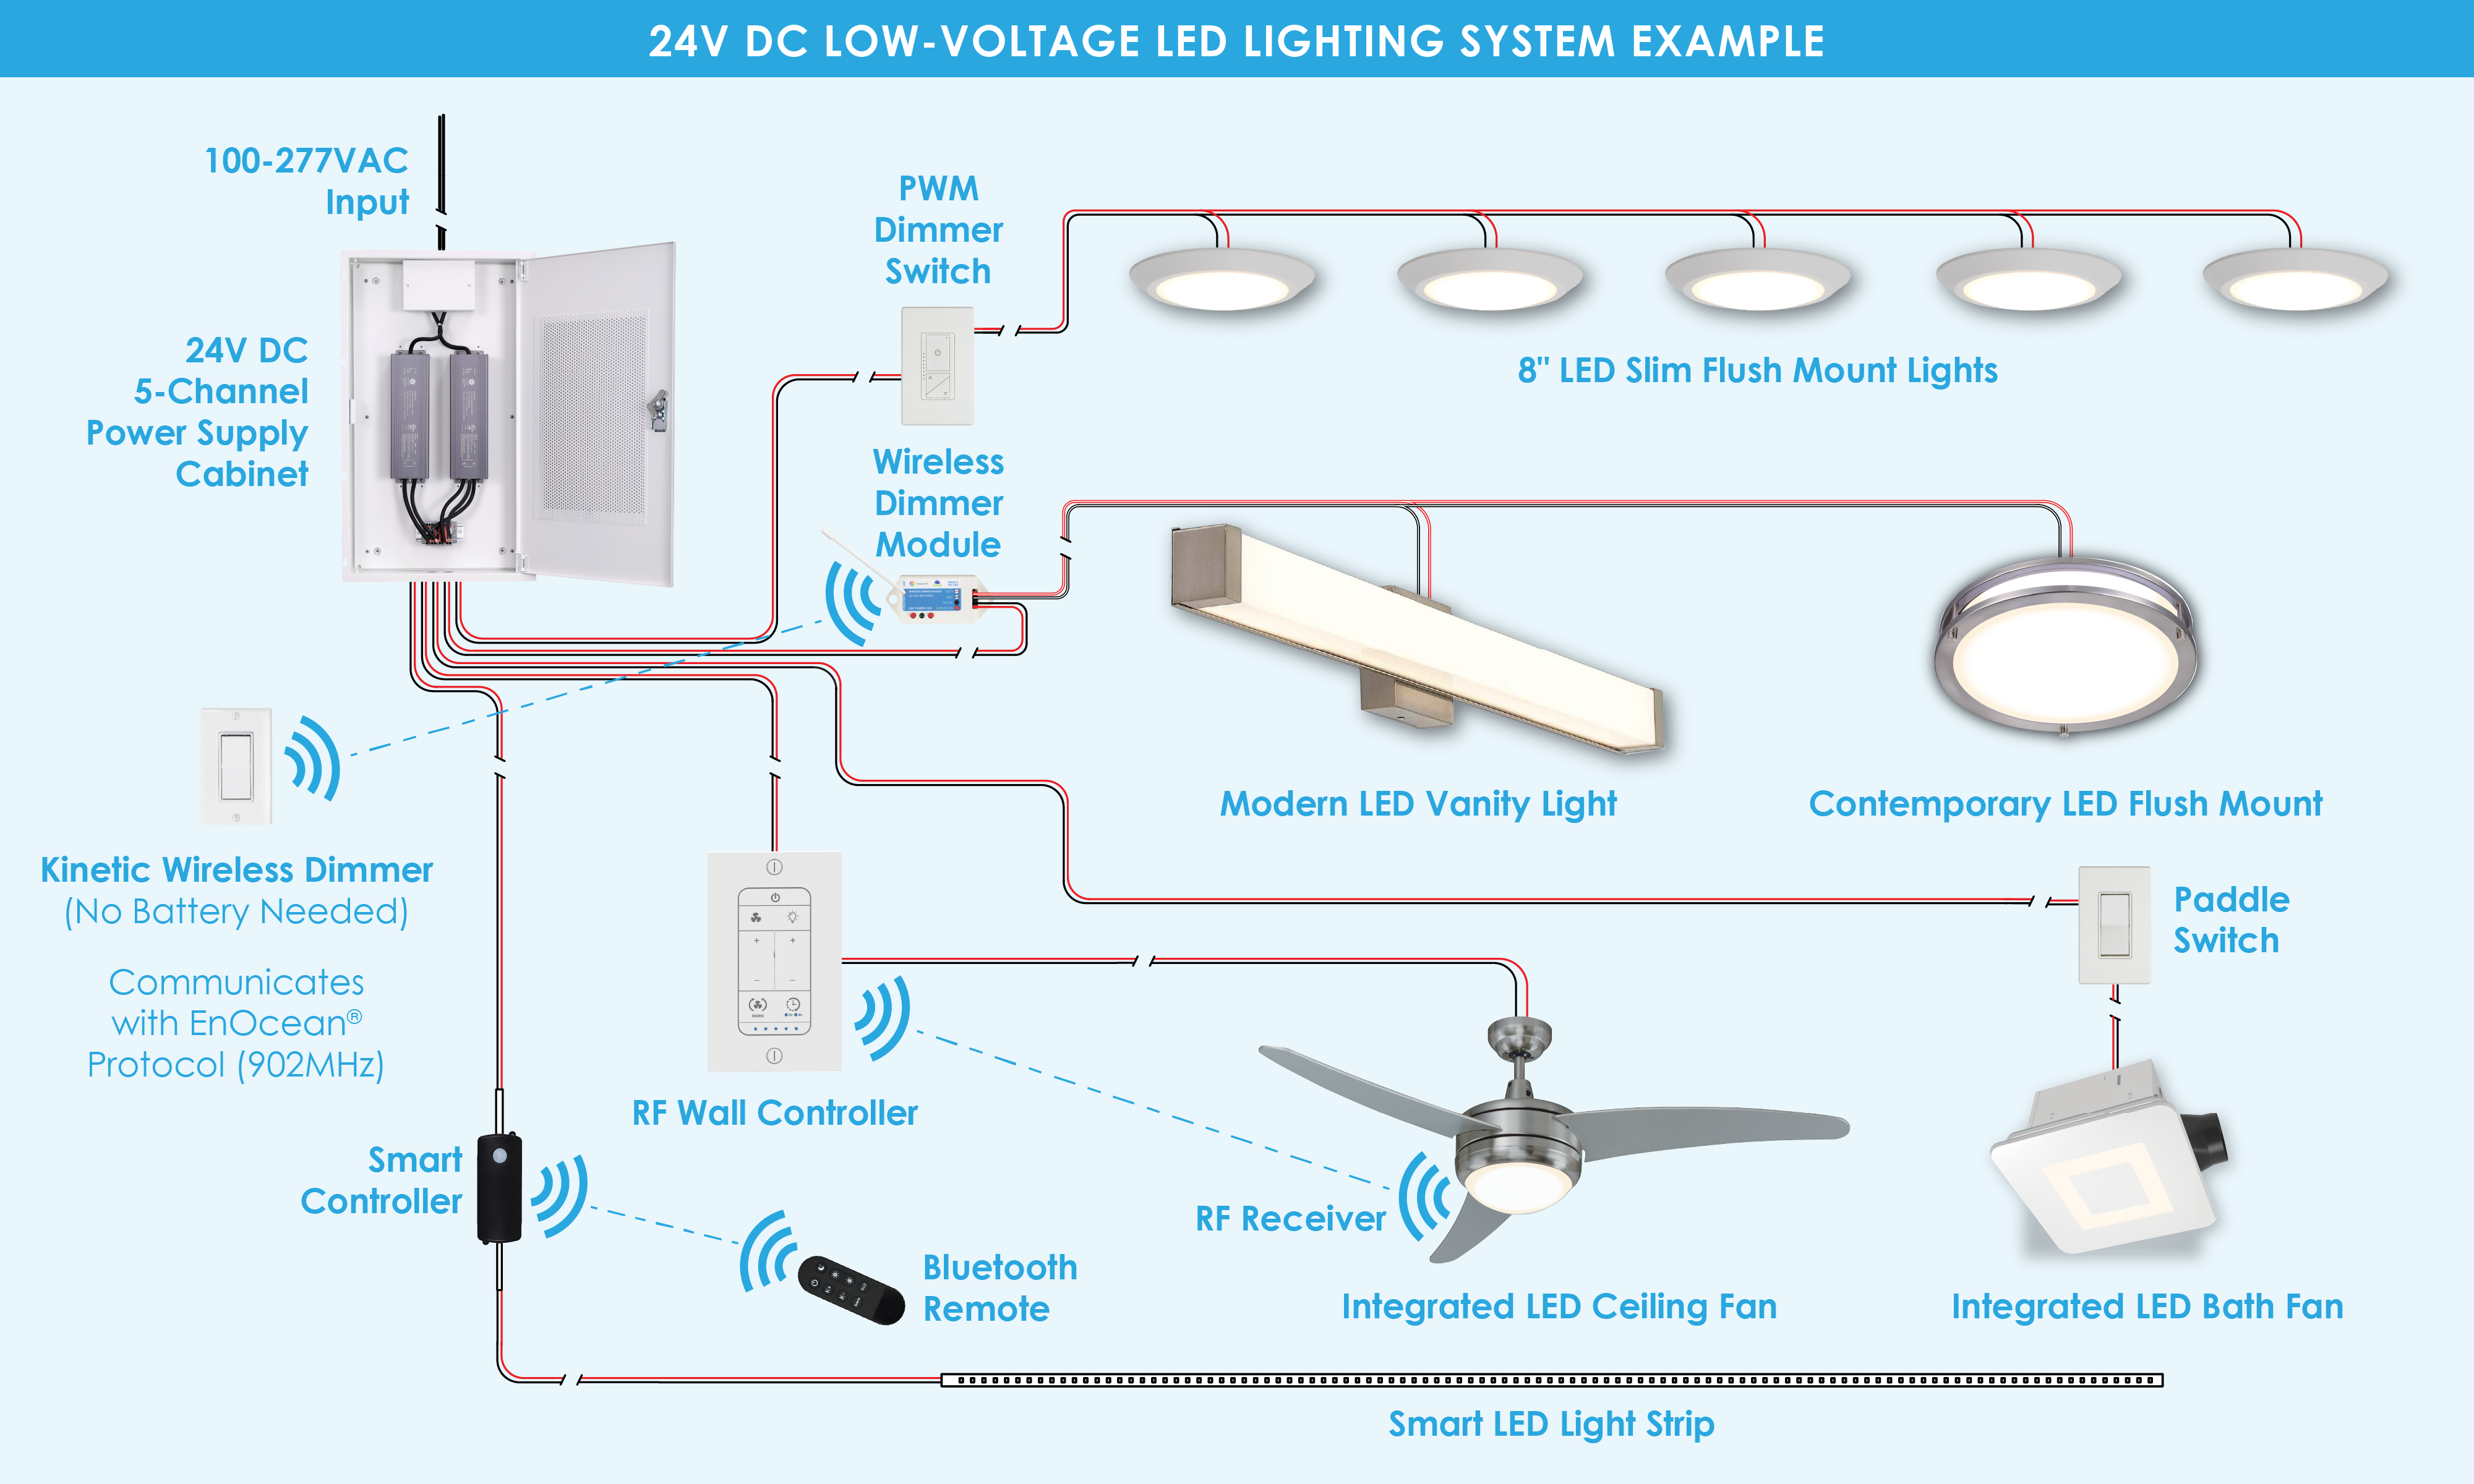 Low-Voltage-Lighting-System-Example_REV16_2000x2.png__PID:16cdc8ae-8422-4793-b80d-7f301c9116e1